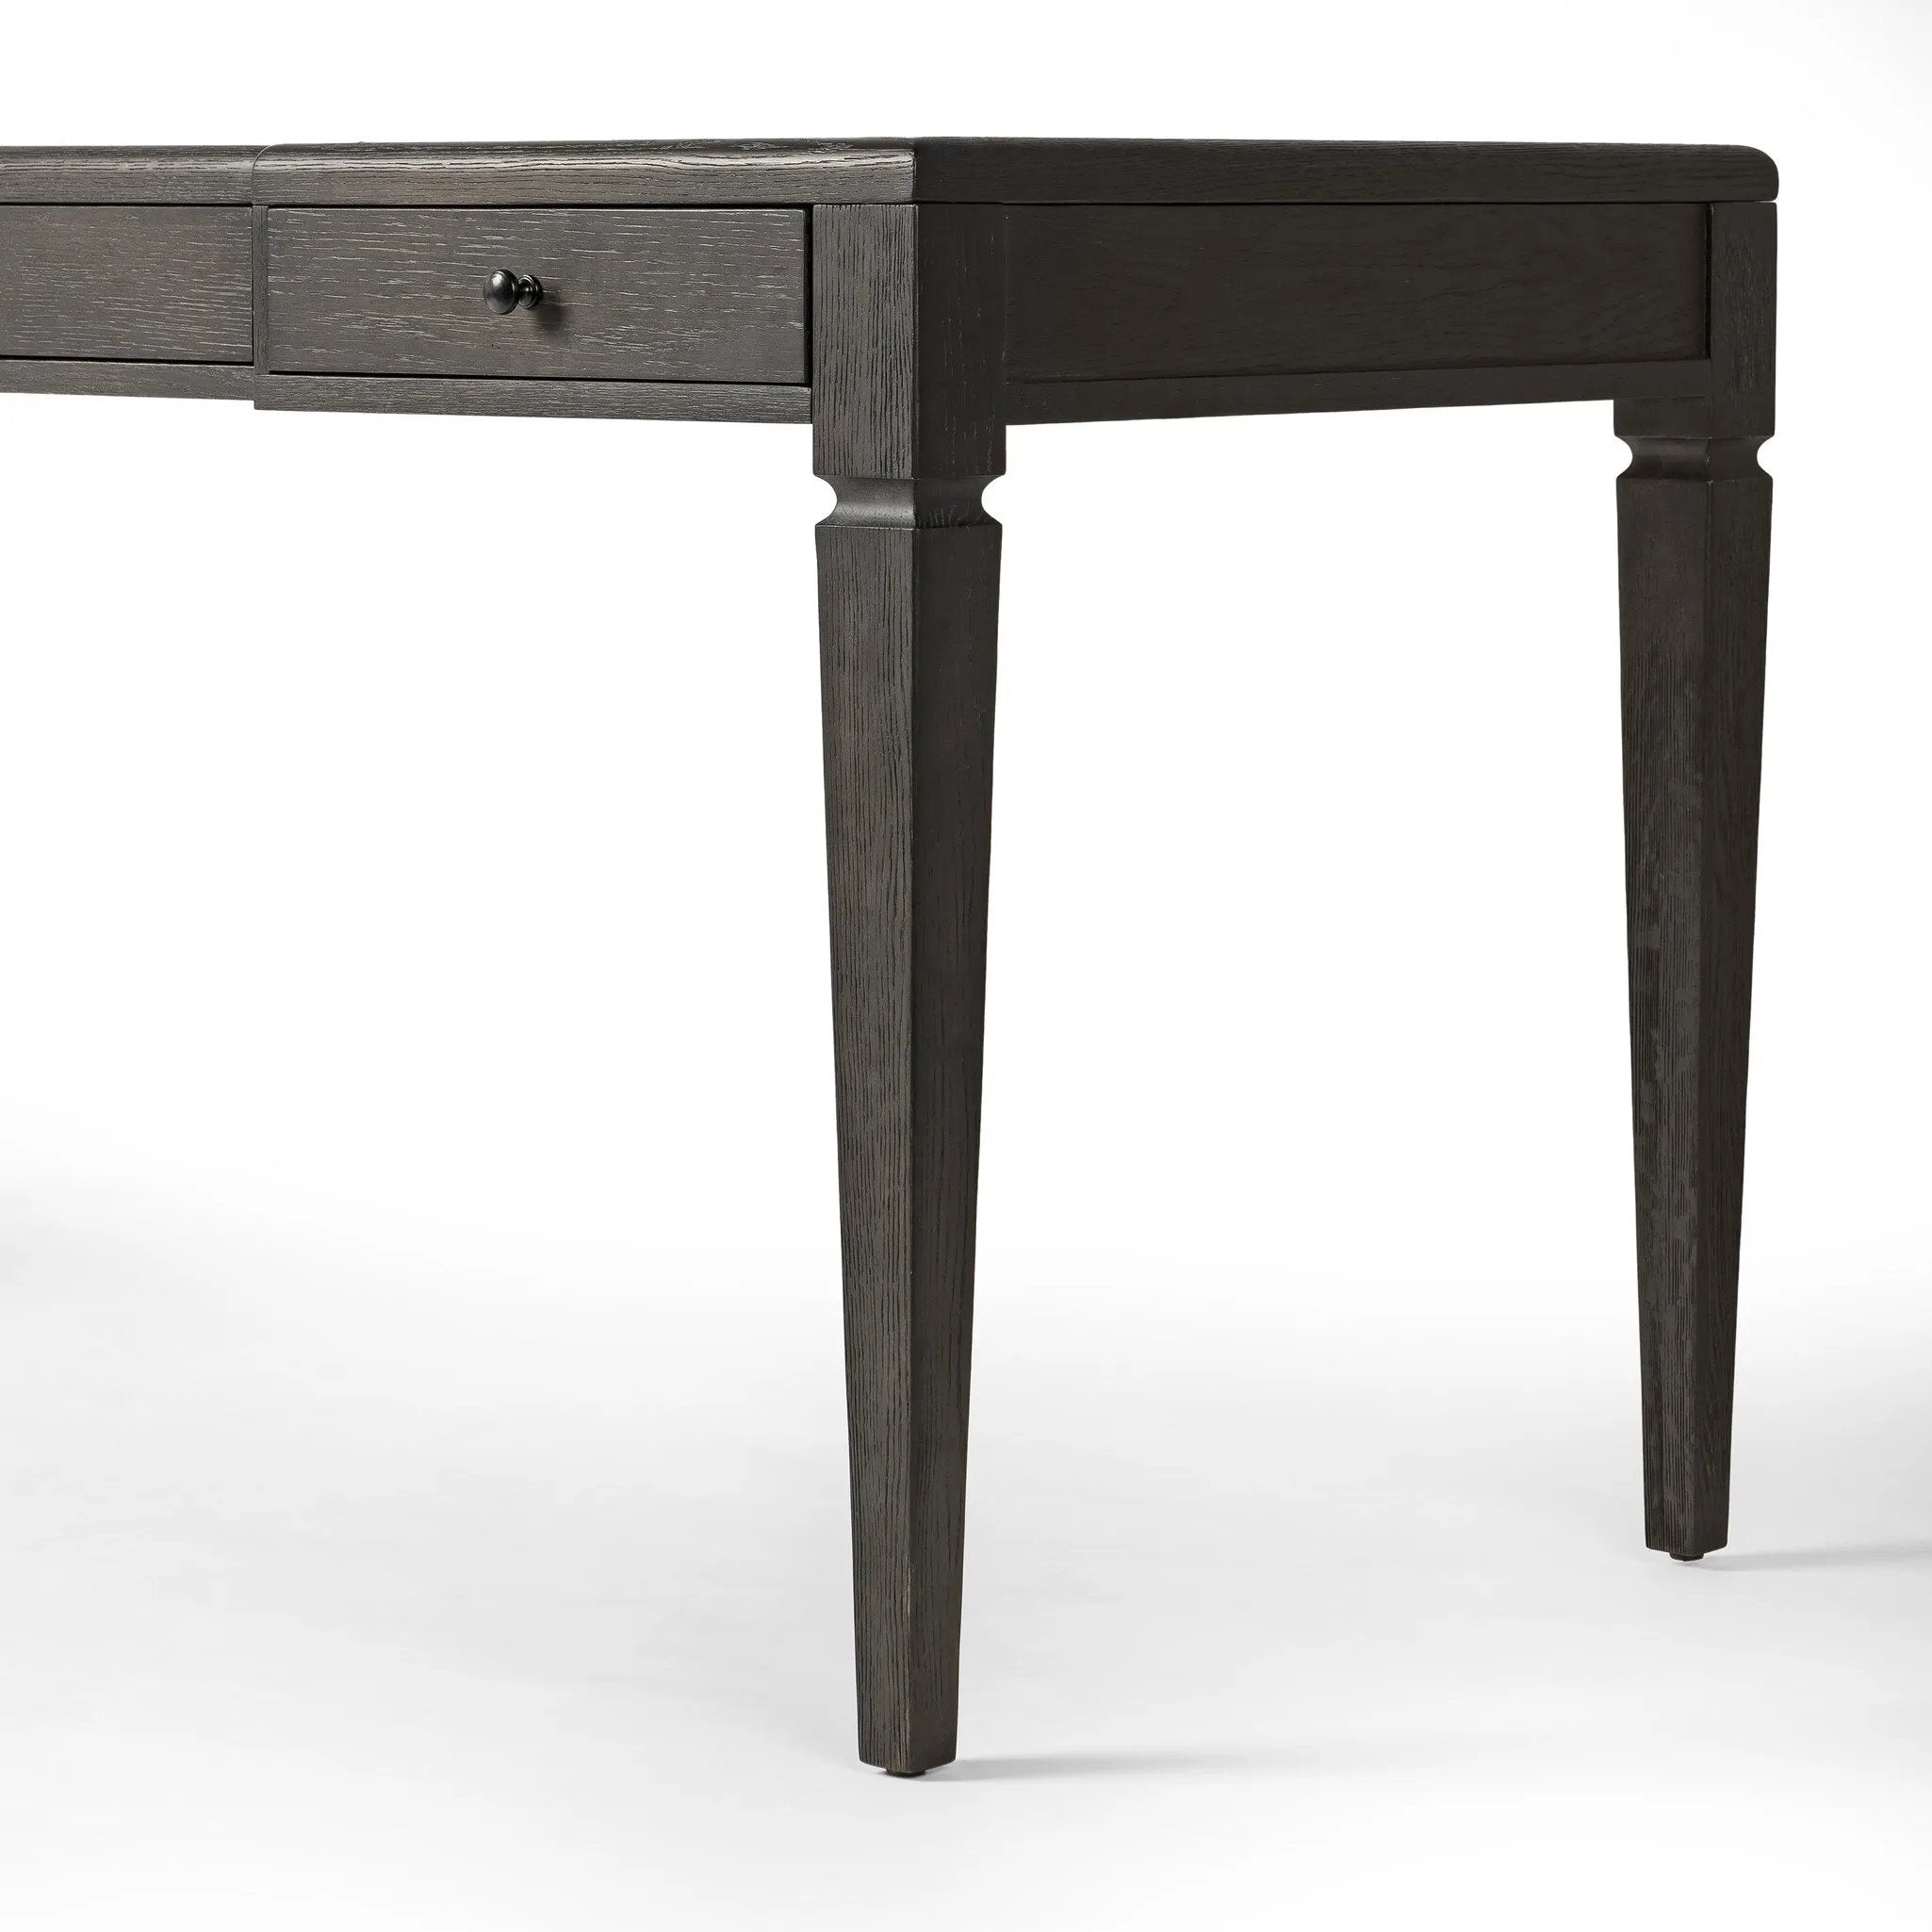 This refreshed directoire-style desk pairs a 100% top-grain leather inset top with a unique reverse breakfront and recessed center drawer. Finished in distressed black oak, it offers the workspace a classic yet updated feel.Collection: Allsto Amethyst Home provides interior design, new home construction design consulting, vintage area rugs, and lighting in the Austin metro area.